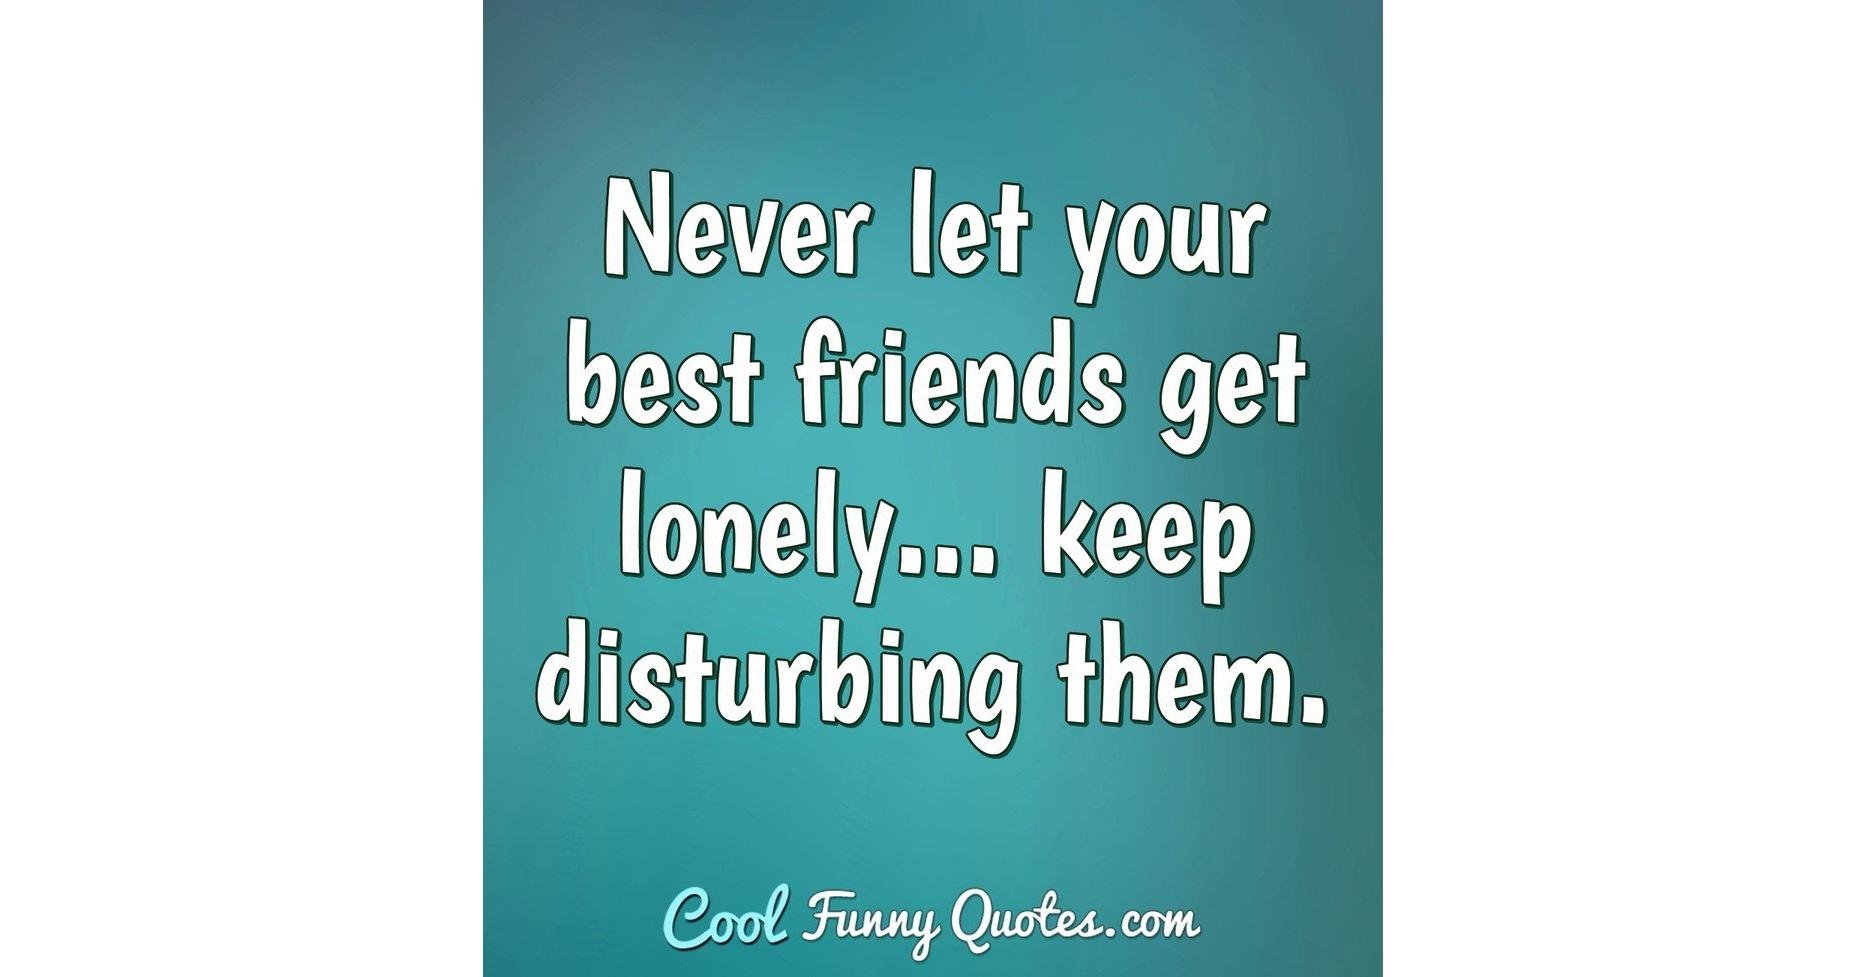 Never let your best friends get lonely... keep disturbing them.